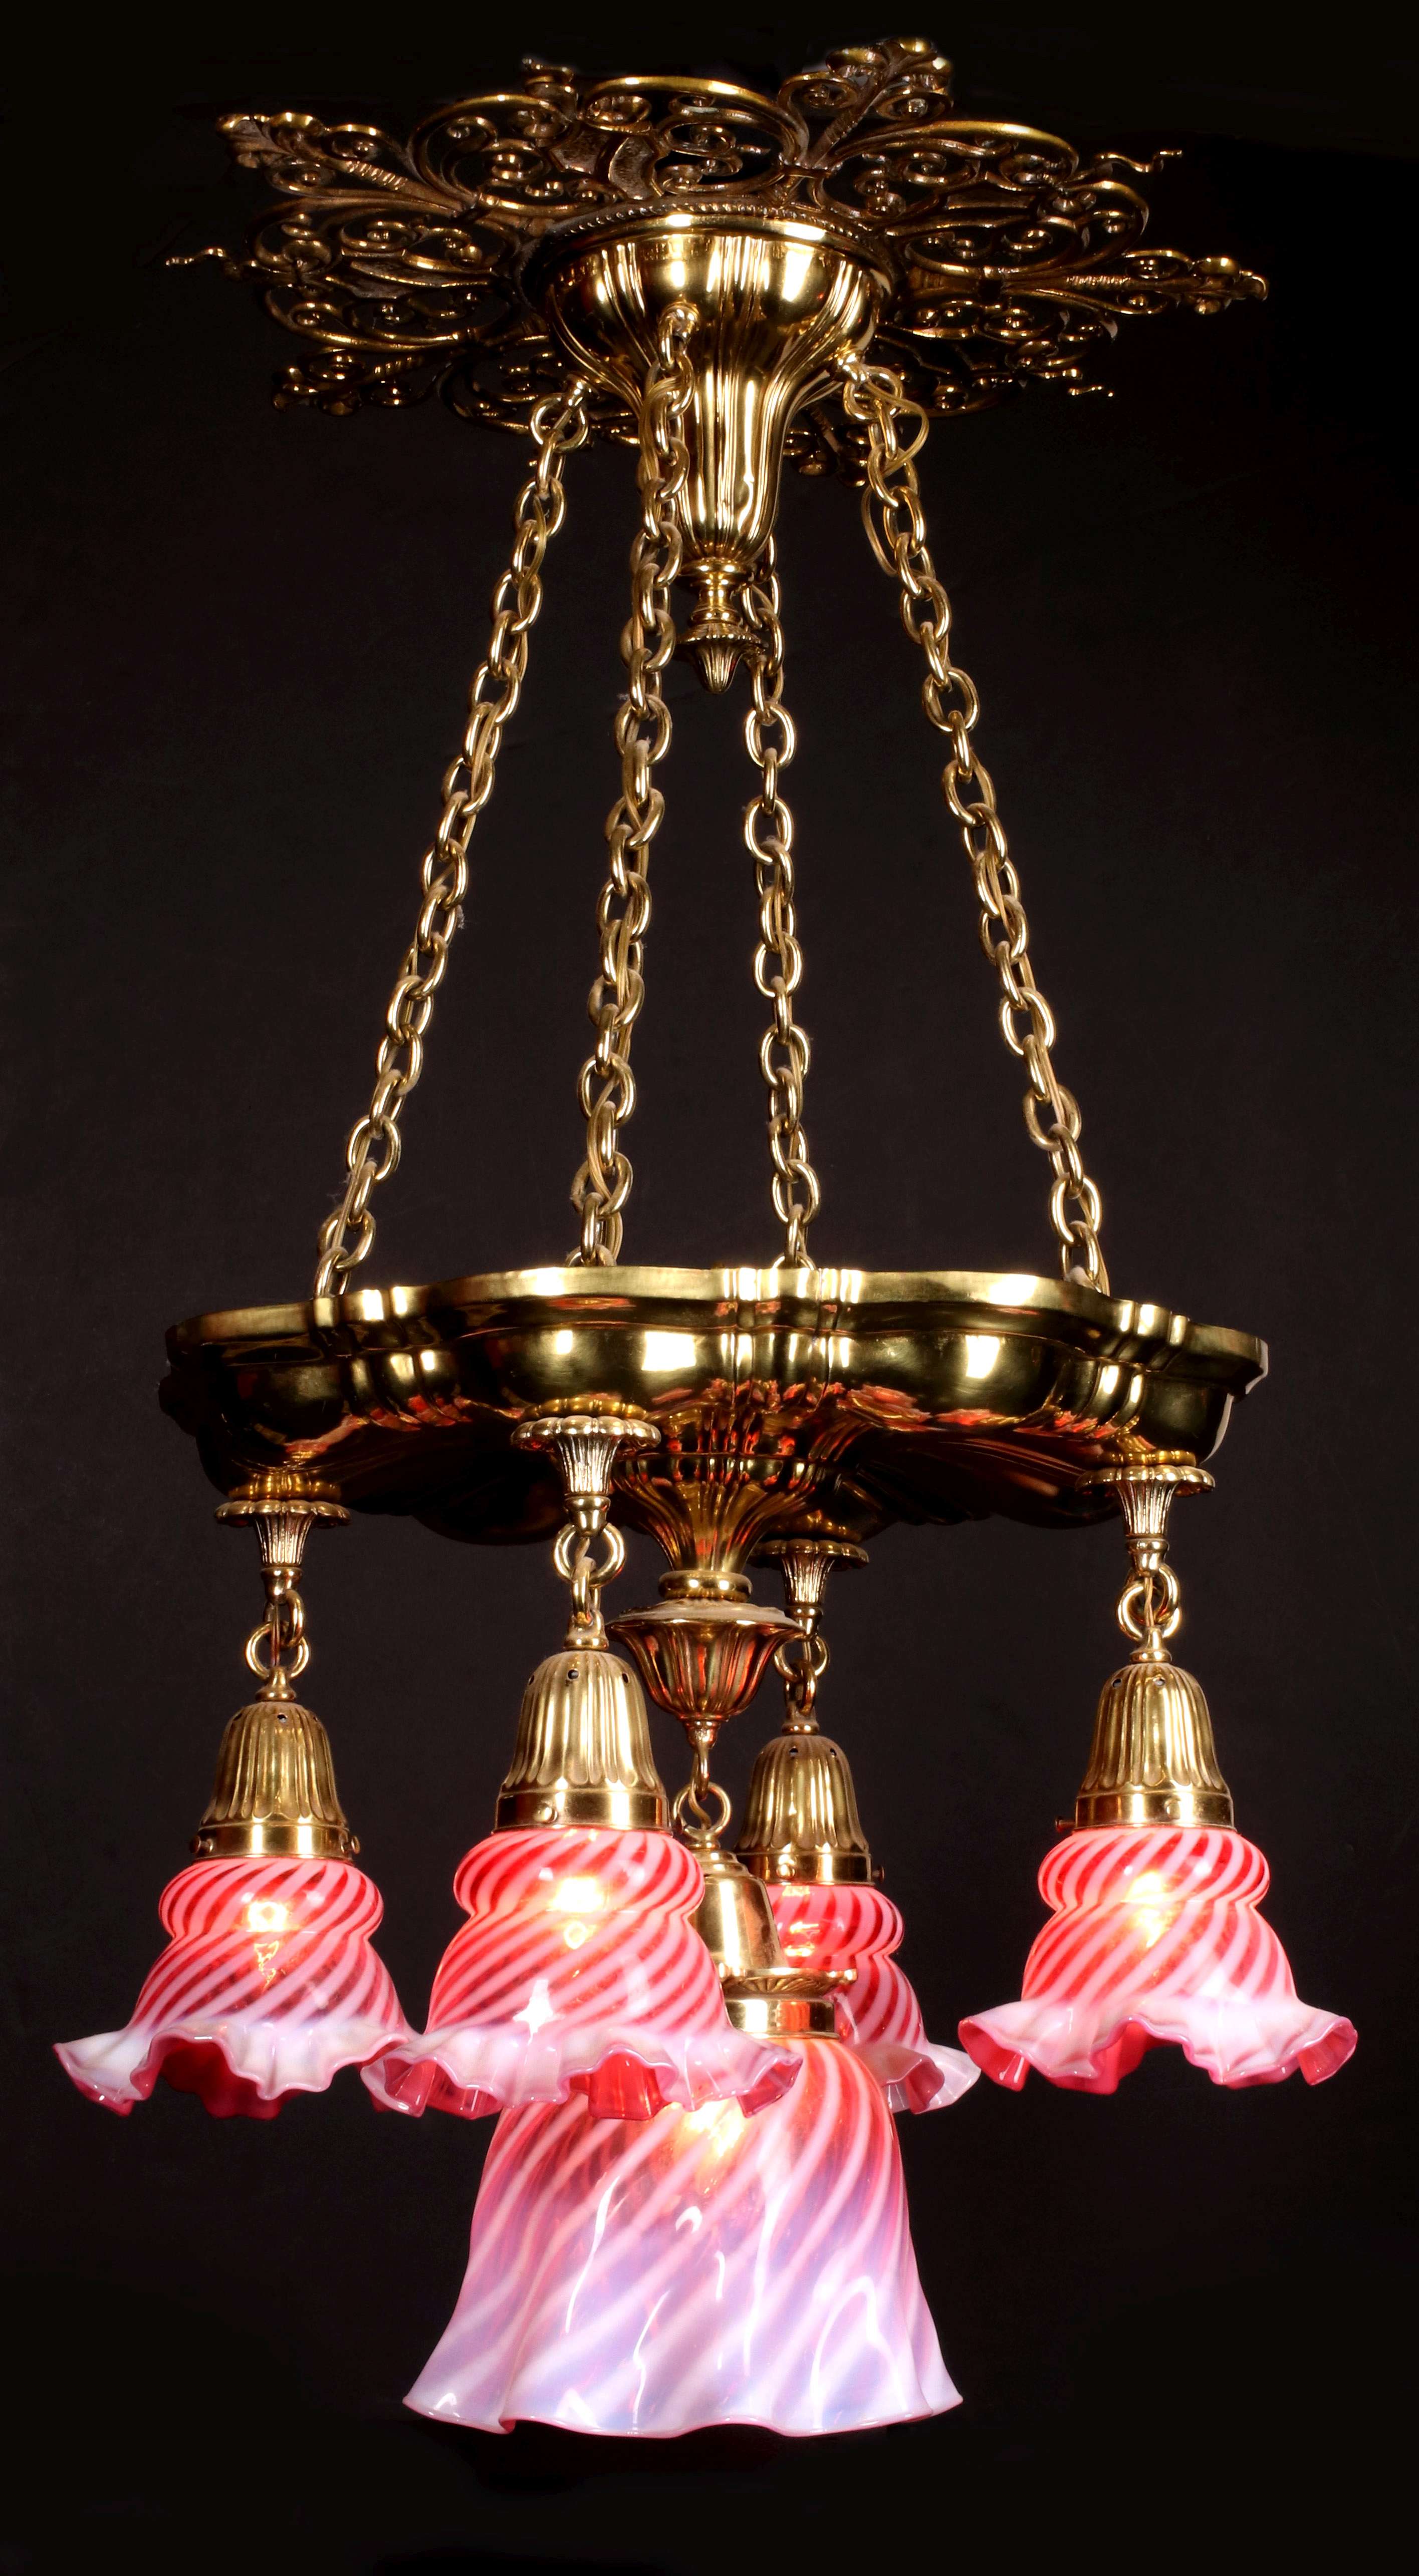 AN ANTIQUE CHANDELIER WITH FENTON GLASS SHADES